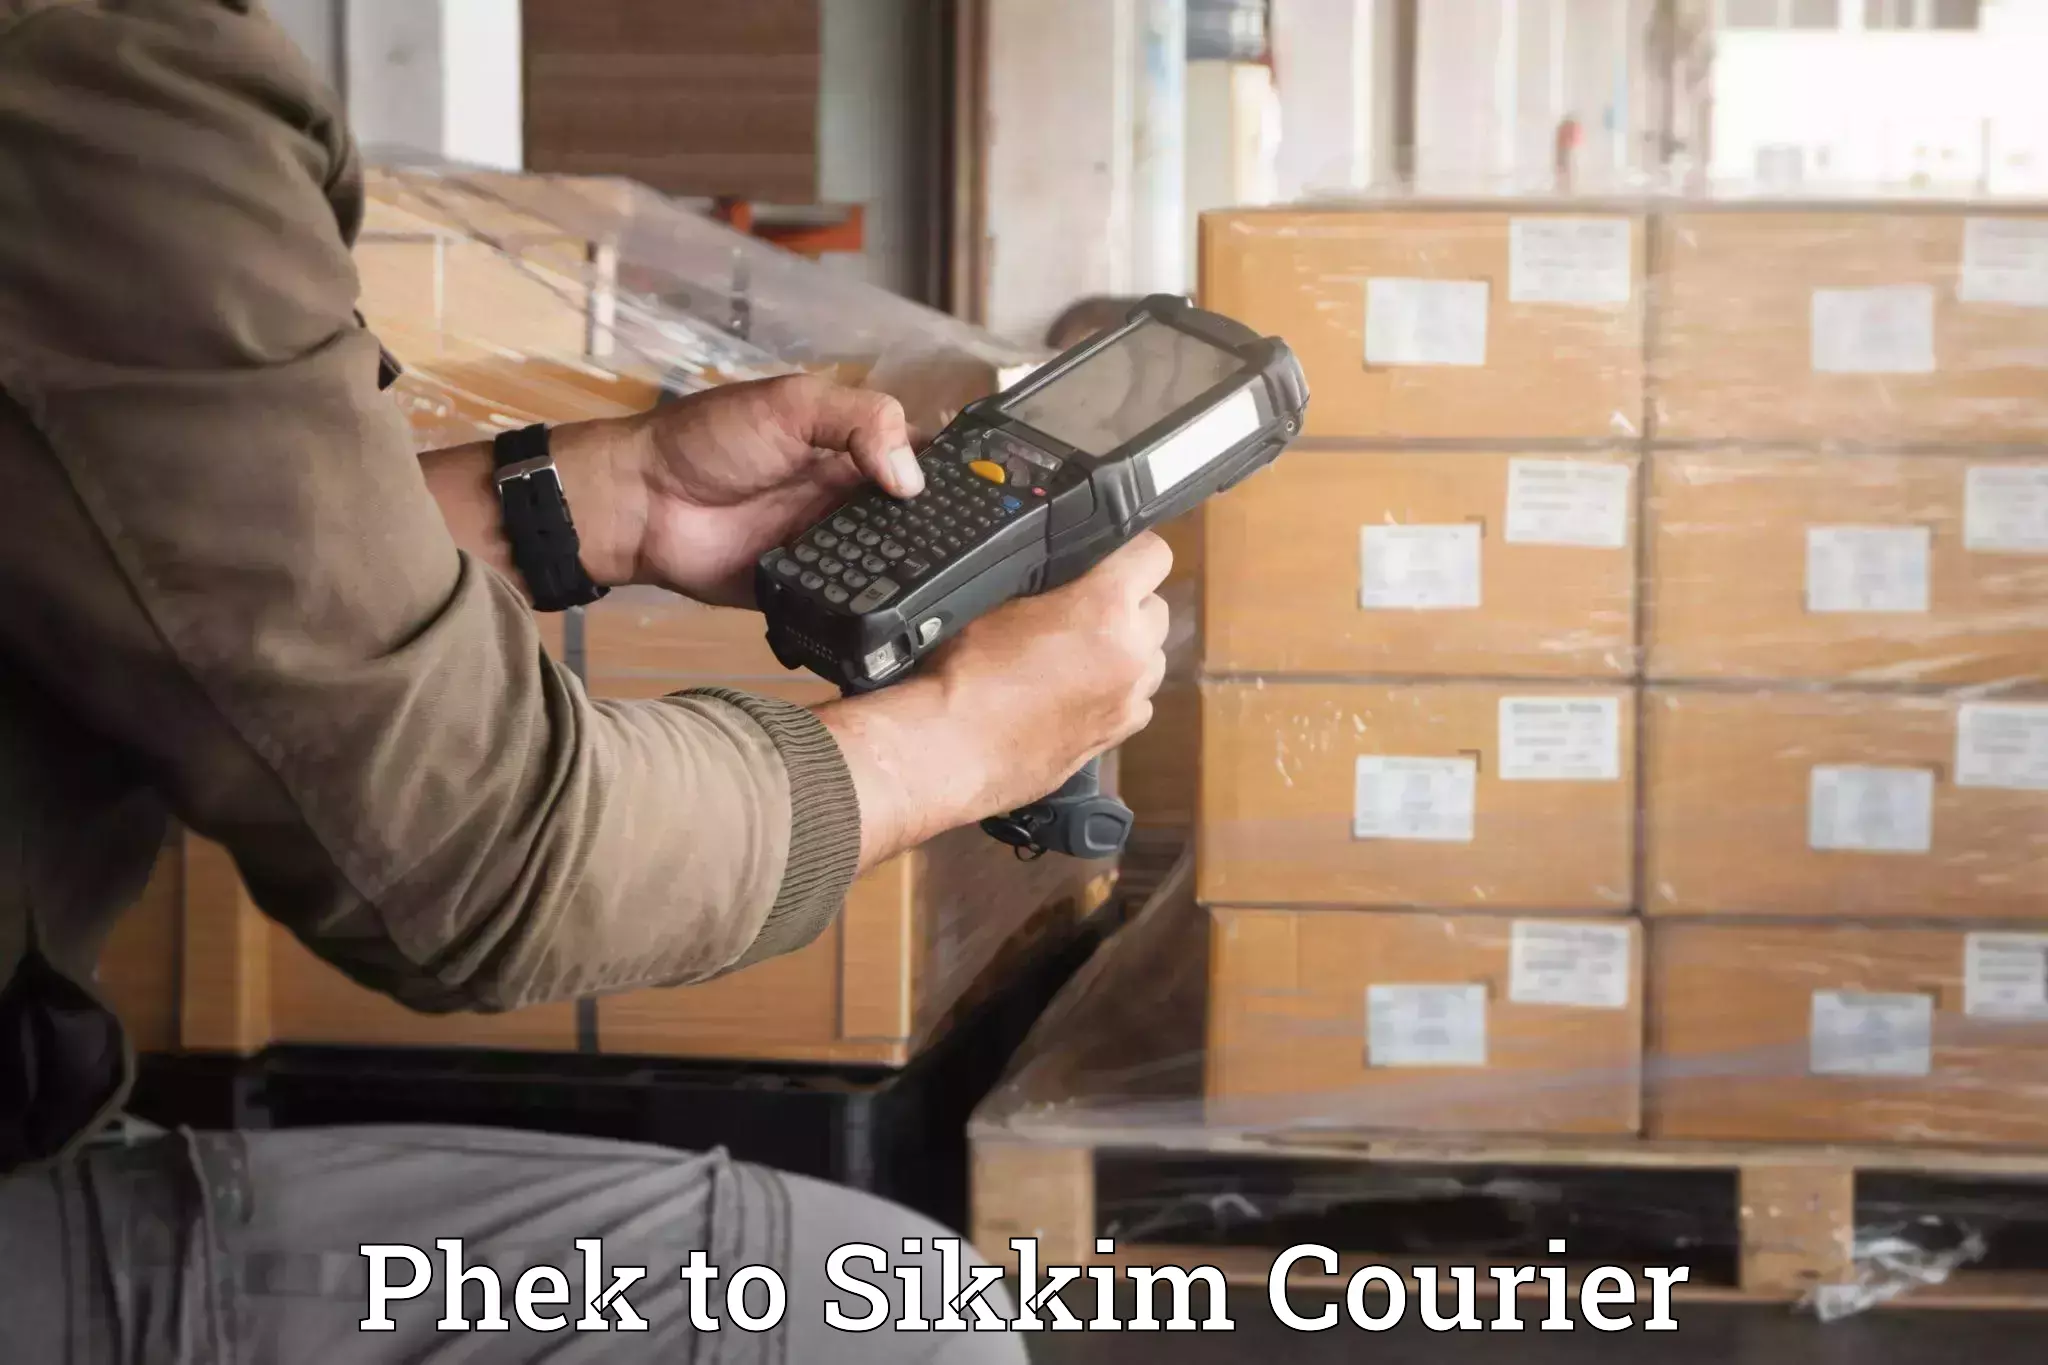 Residential moving experts Phek to Sikkim